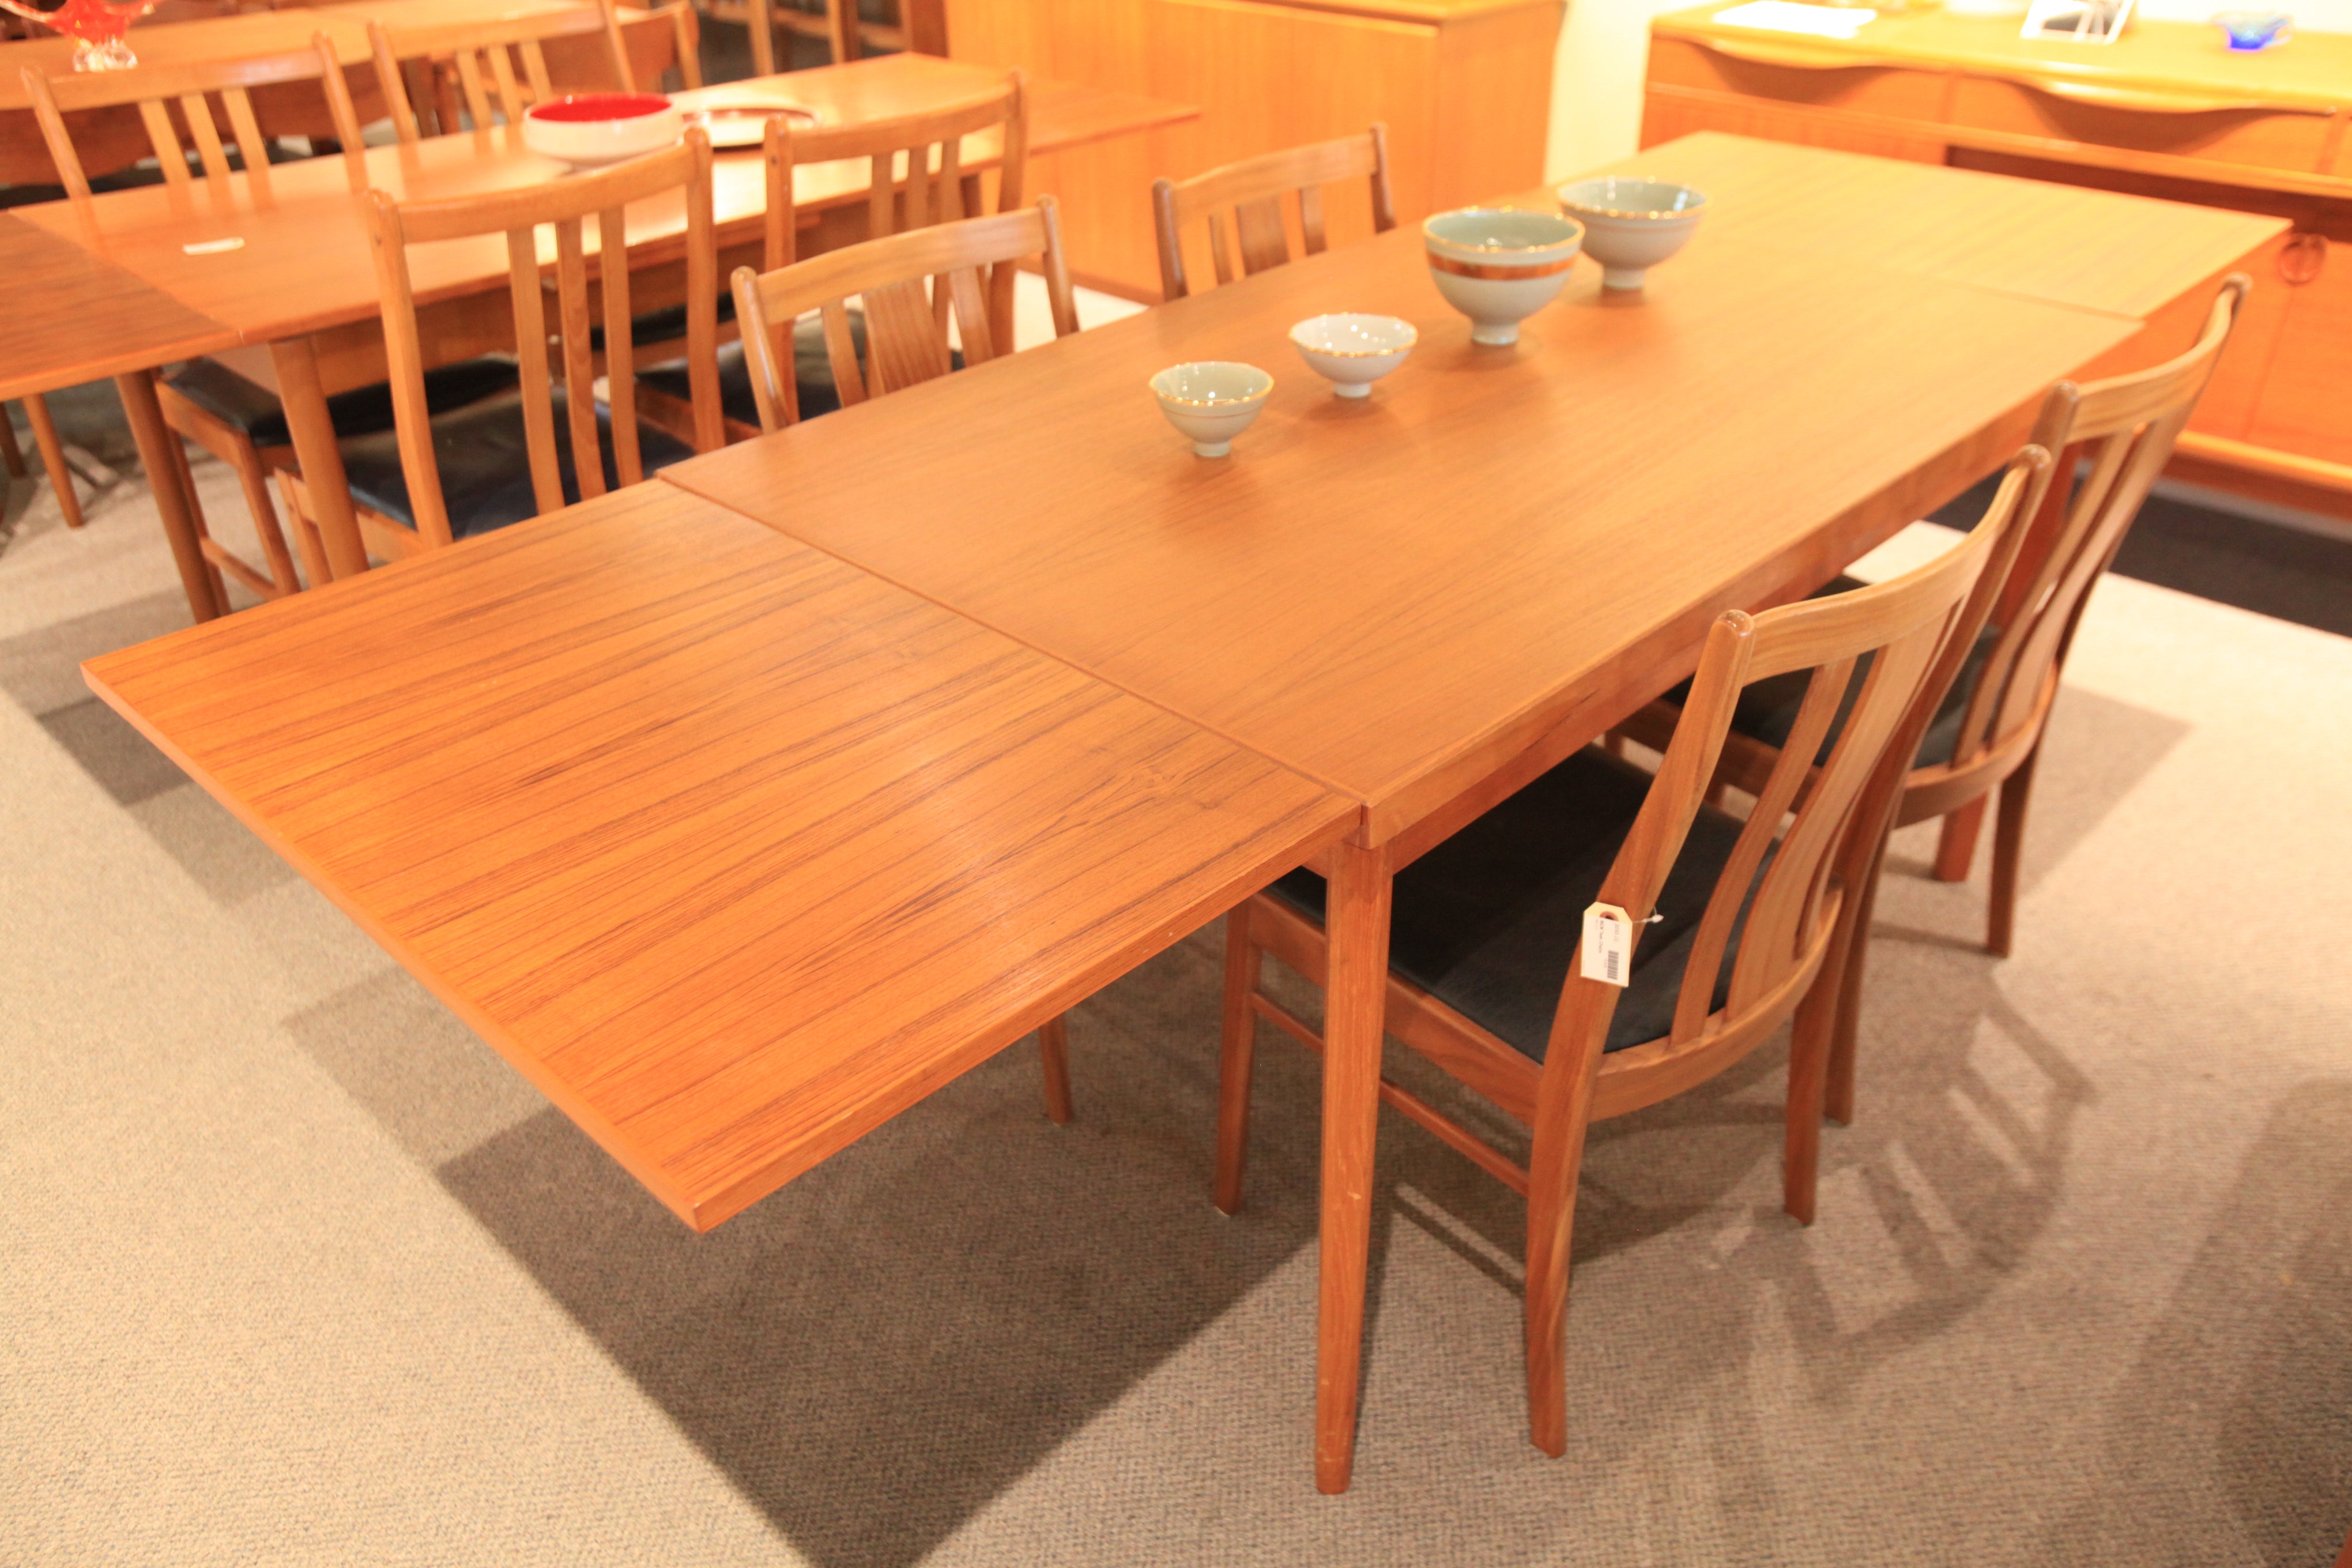 Vintage Danish Teak Dining Table w/ Pullout Extensions (53.5 x 33.5) (93.25 x 33.5)